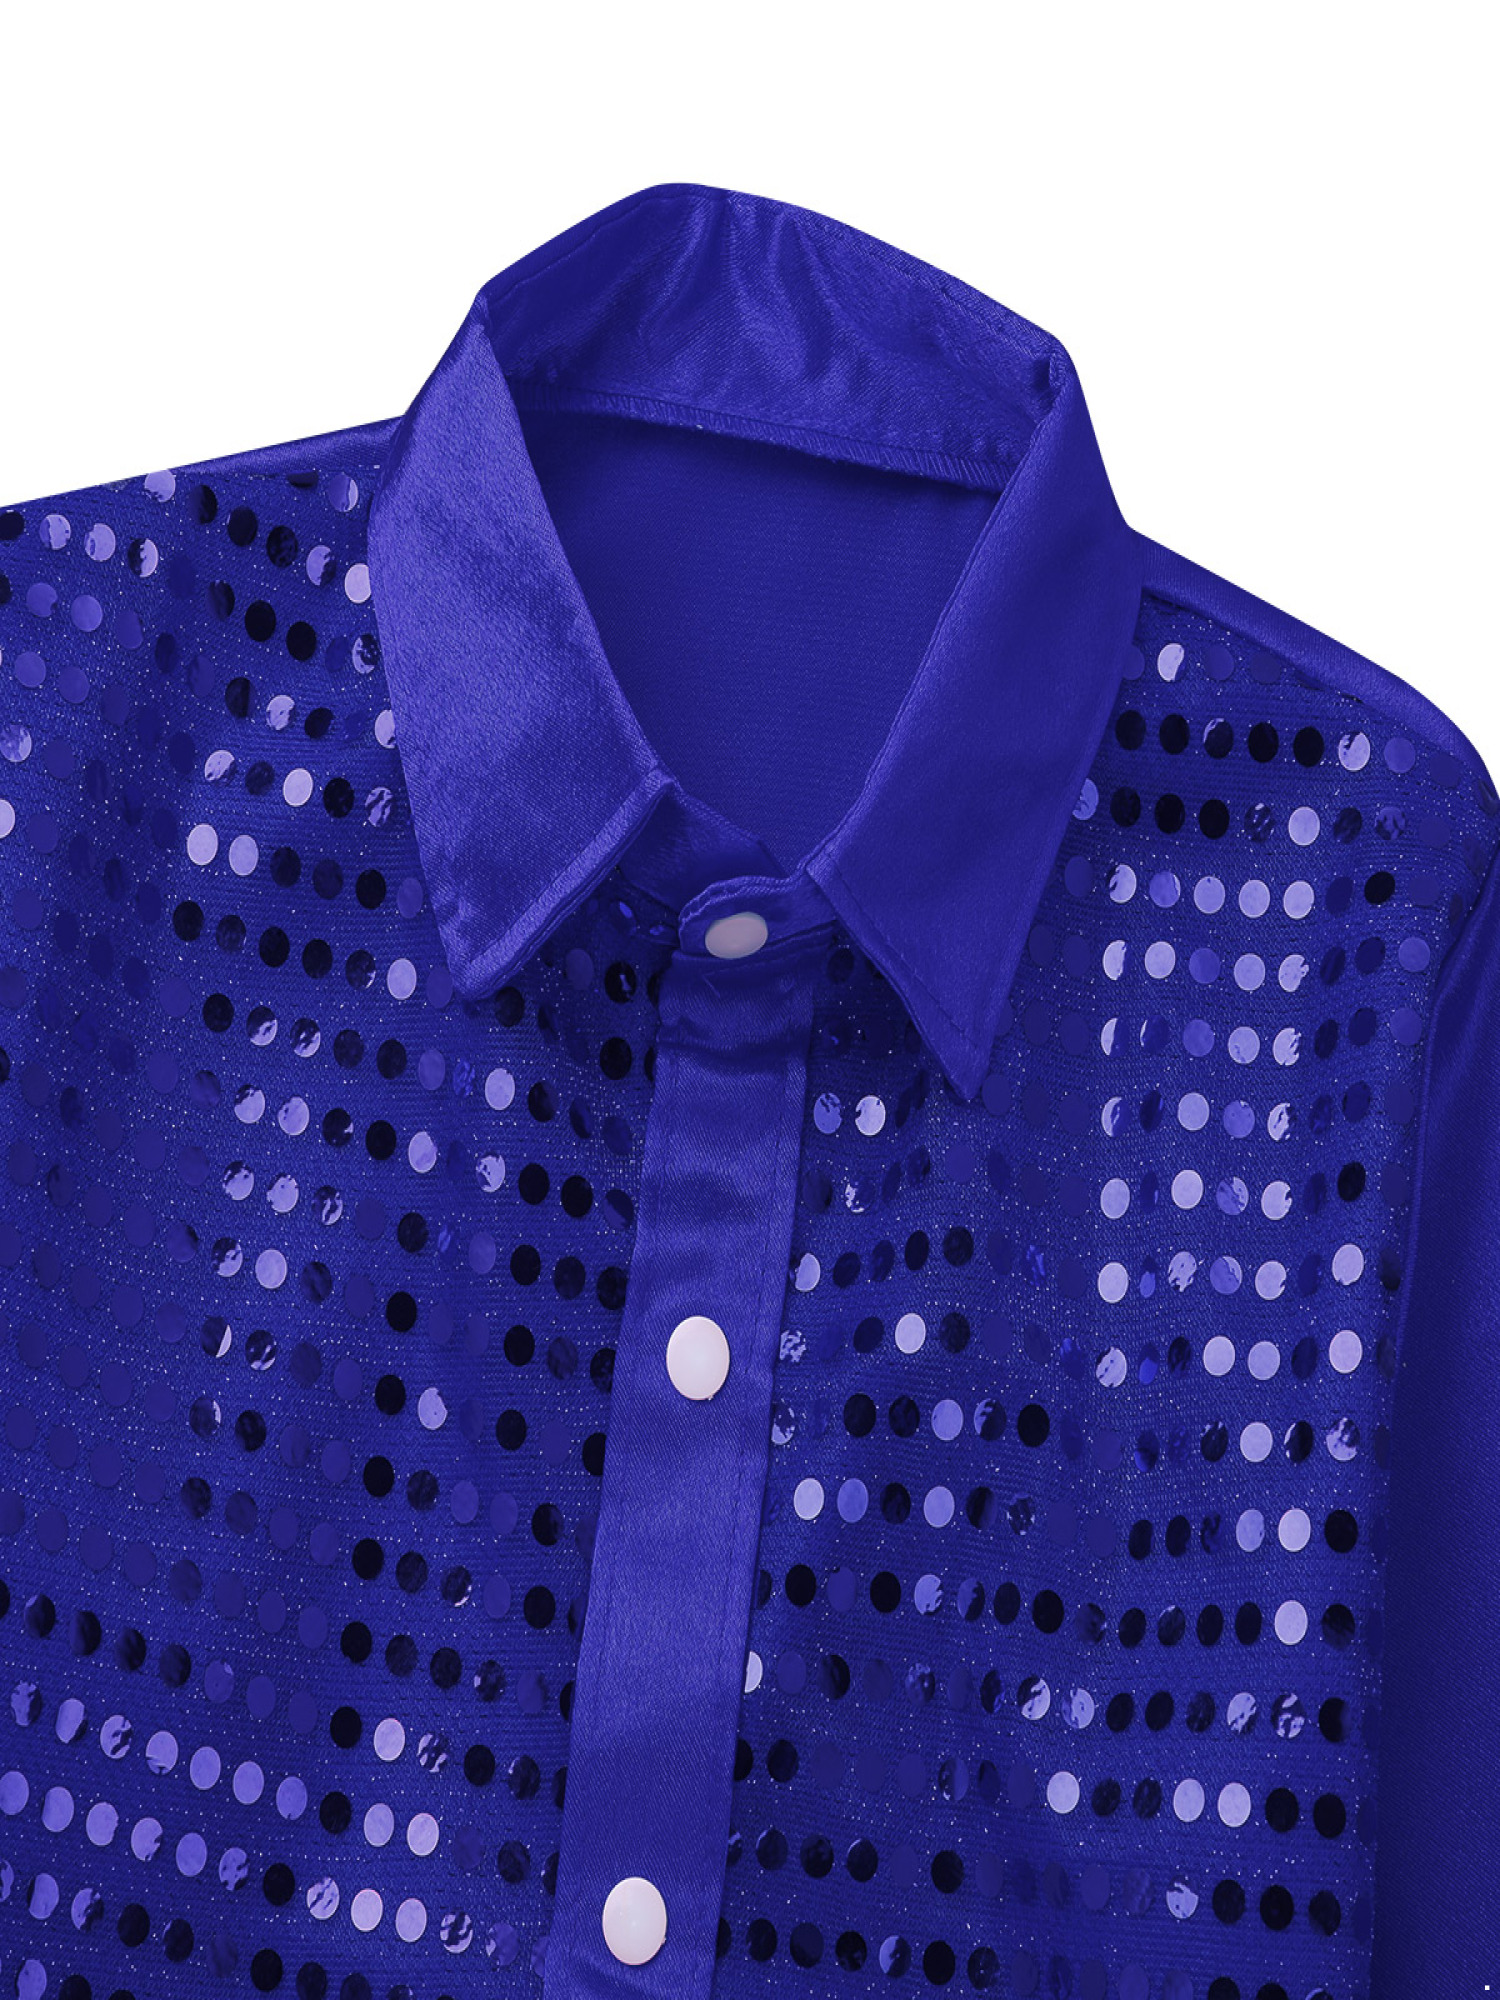 YEAHDOR Kids Boys Sparkly Sequins Lapel Collar Shirt Long Sleeve Tops for Jazz Latin Dance Performance Blue 4-5 - image 3 of 7